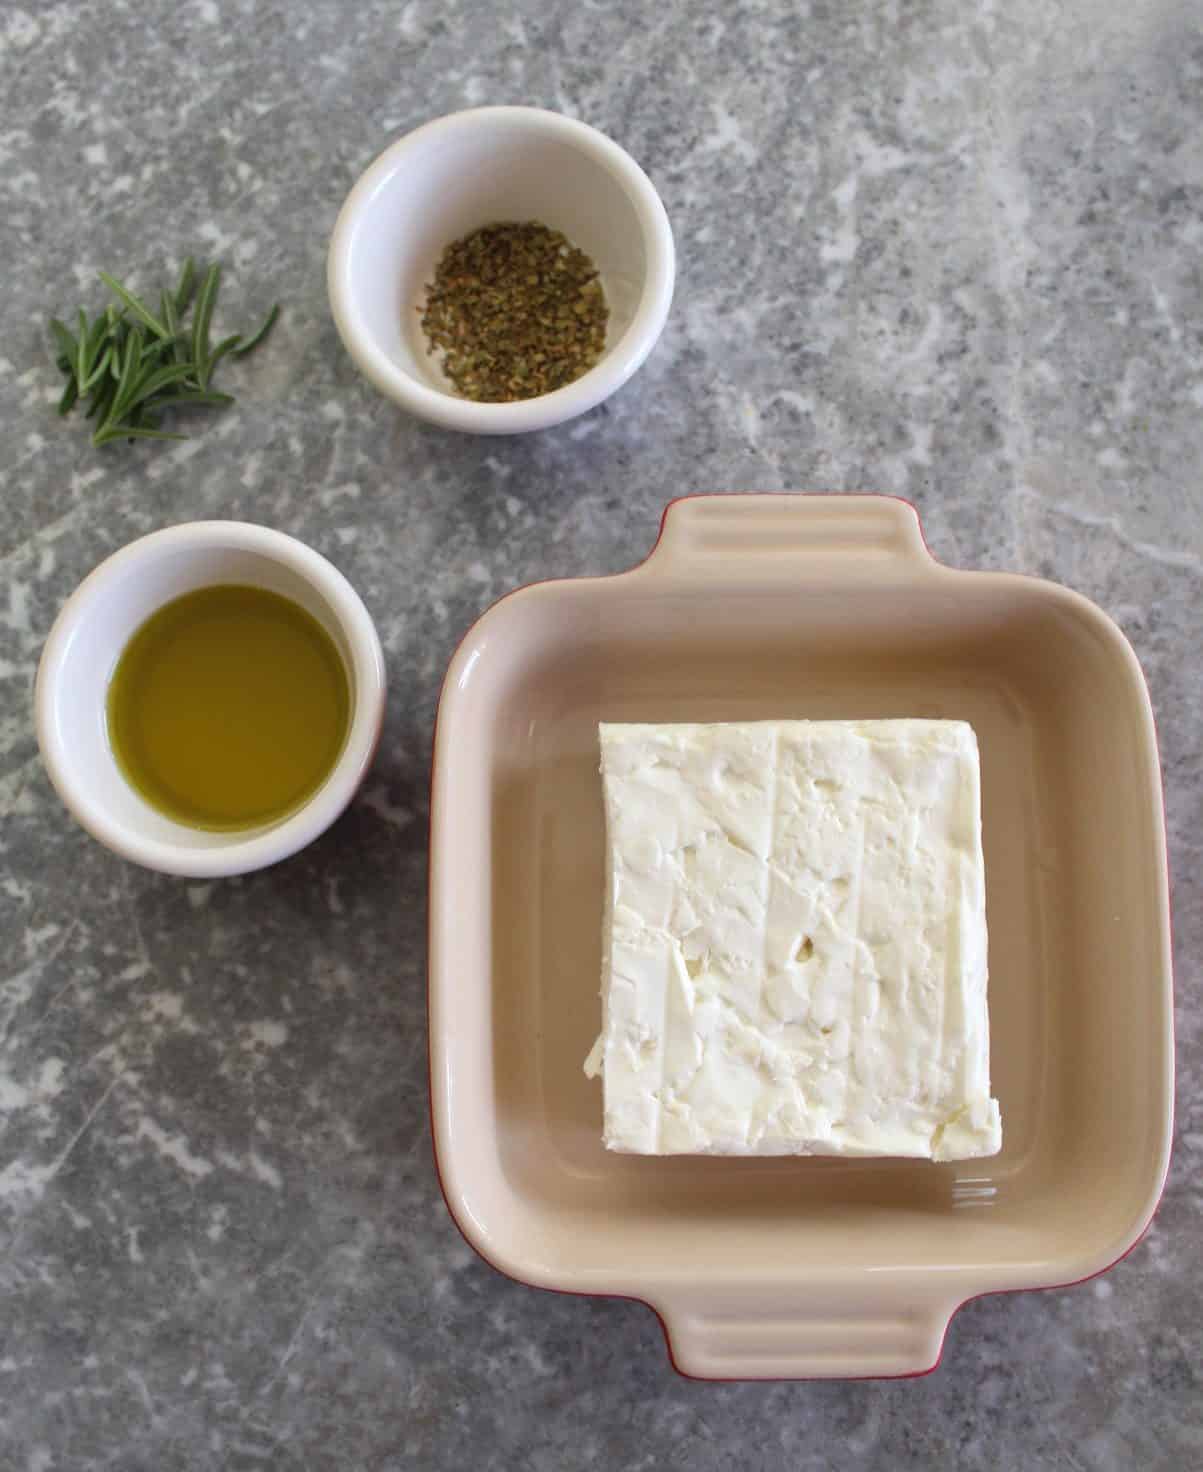 Ingredients for baked feta cheese - feta cheese block in a baking tray, fresh rosemary, dry oregano and olive oil.